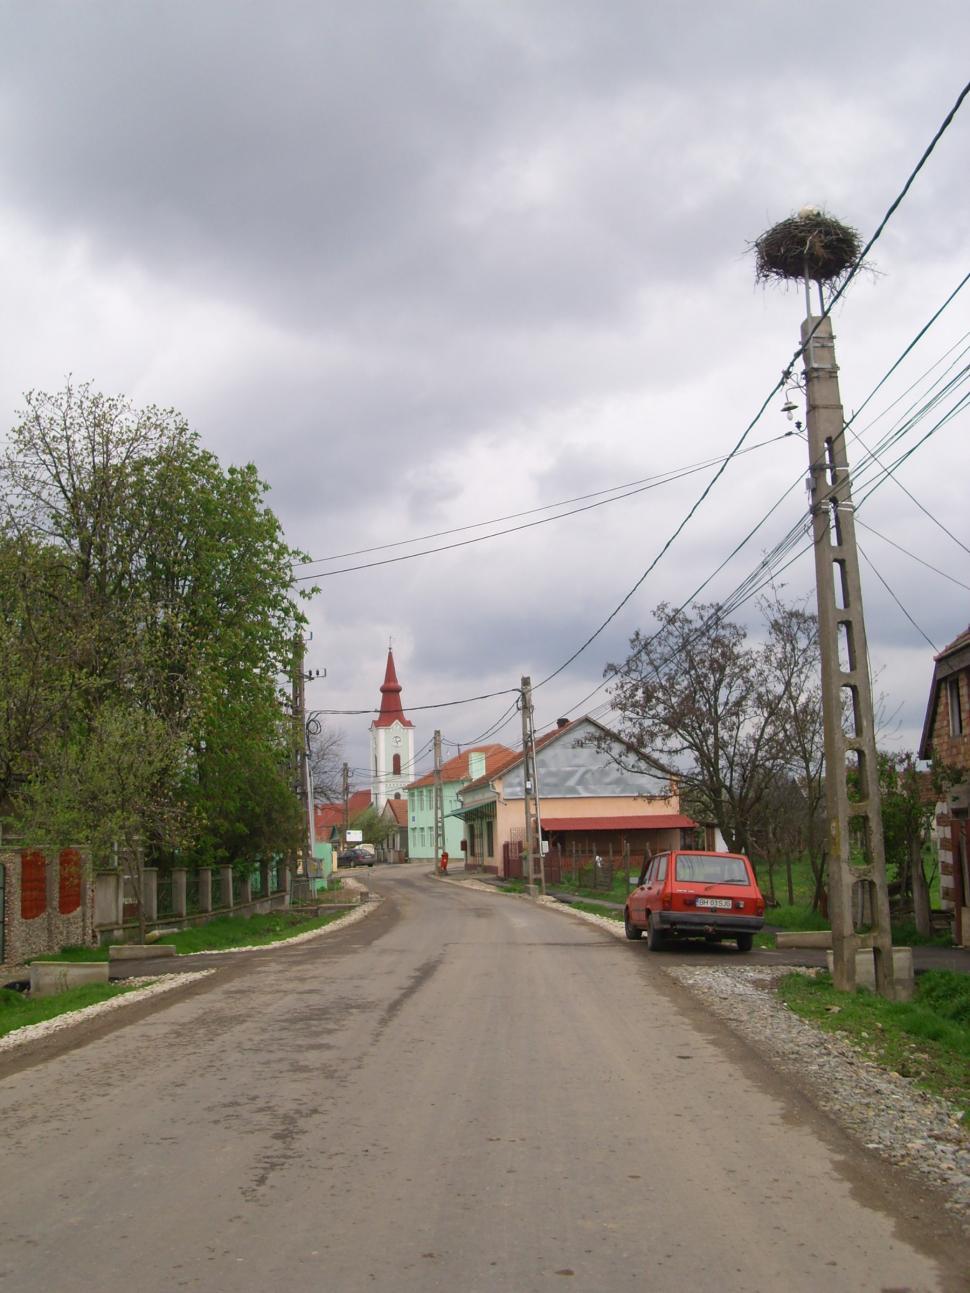 Free Image of Street of a village 